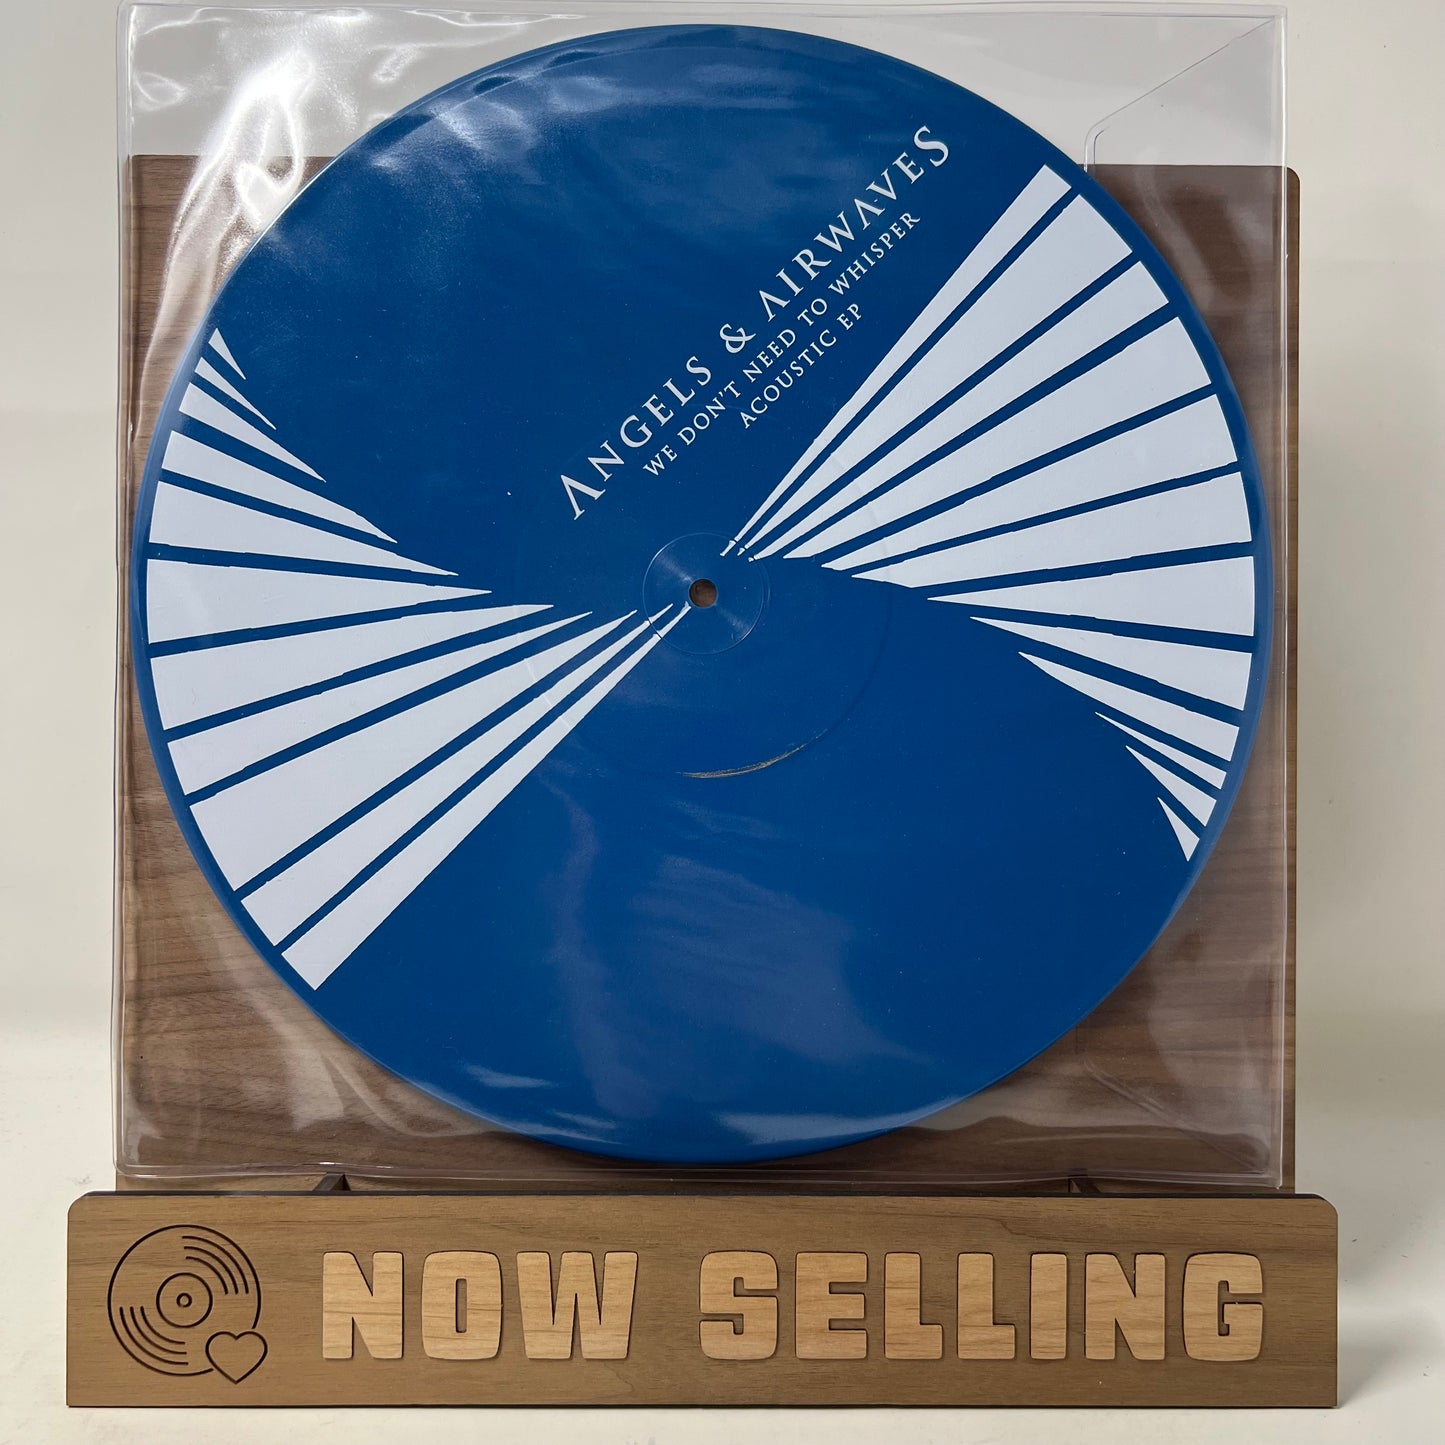 Angels & Airwaves - We Don't Need To Whisper Acoustic EP Blue SIGNED